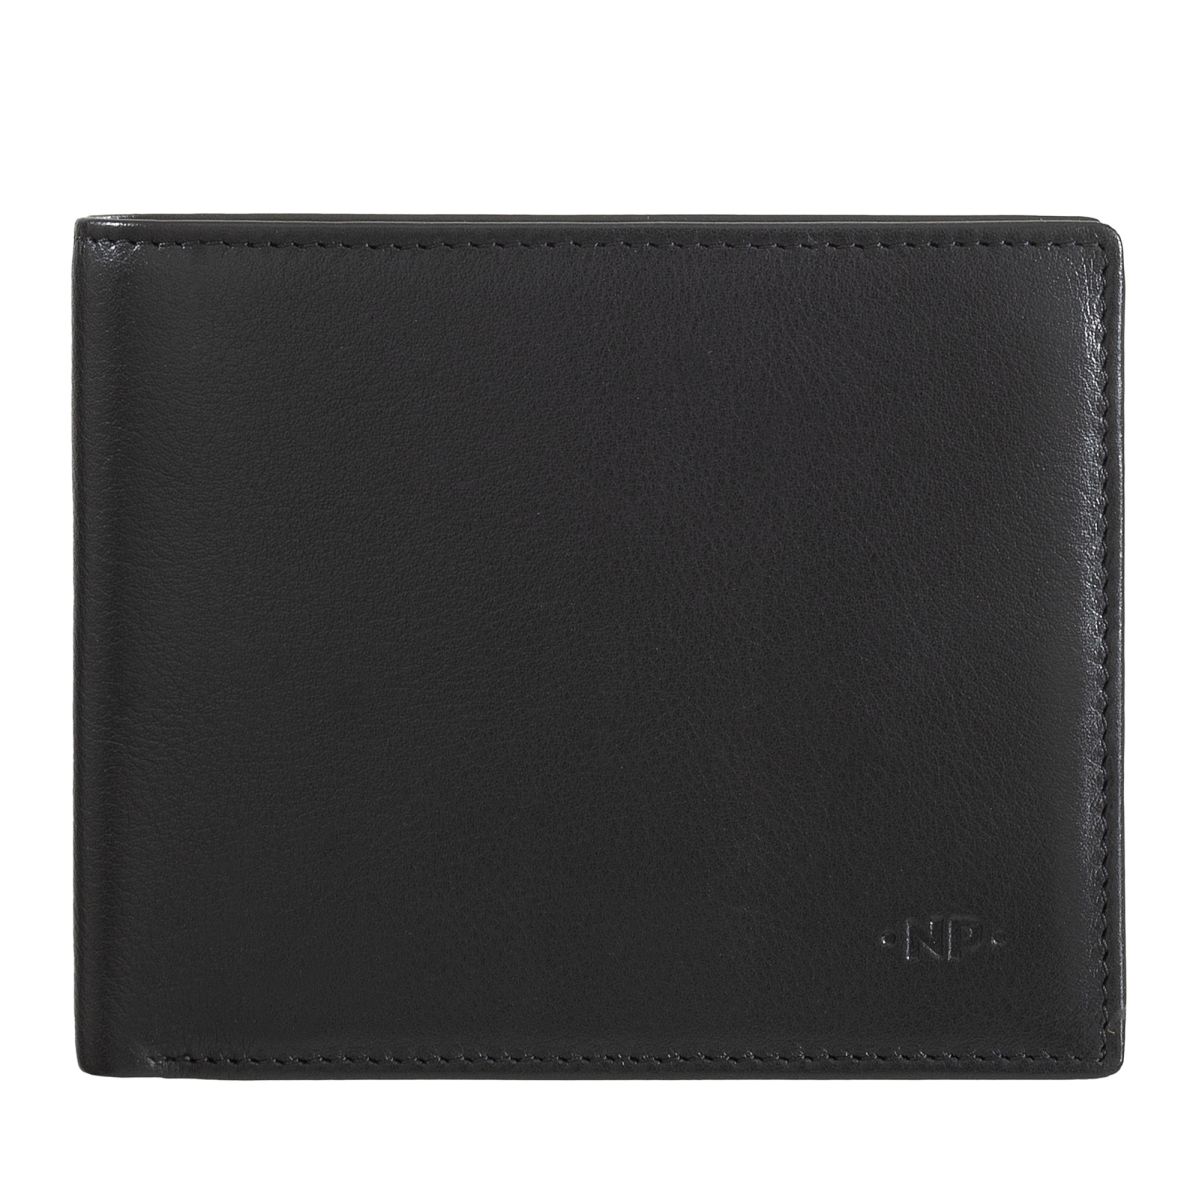 Slim Leather Wallet With Coin Pocket - Black